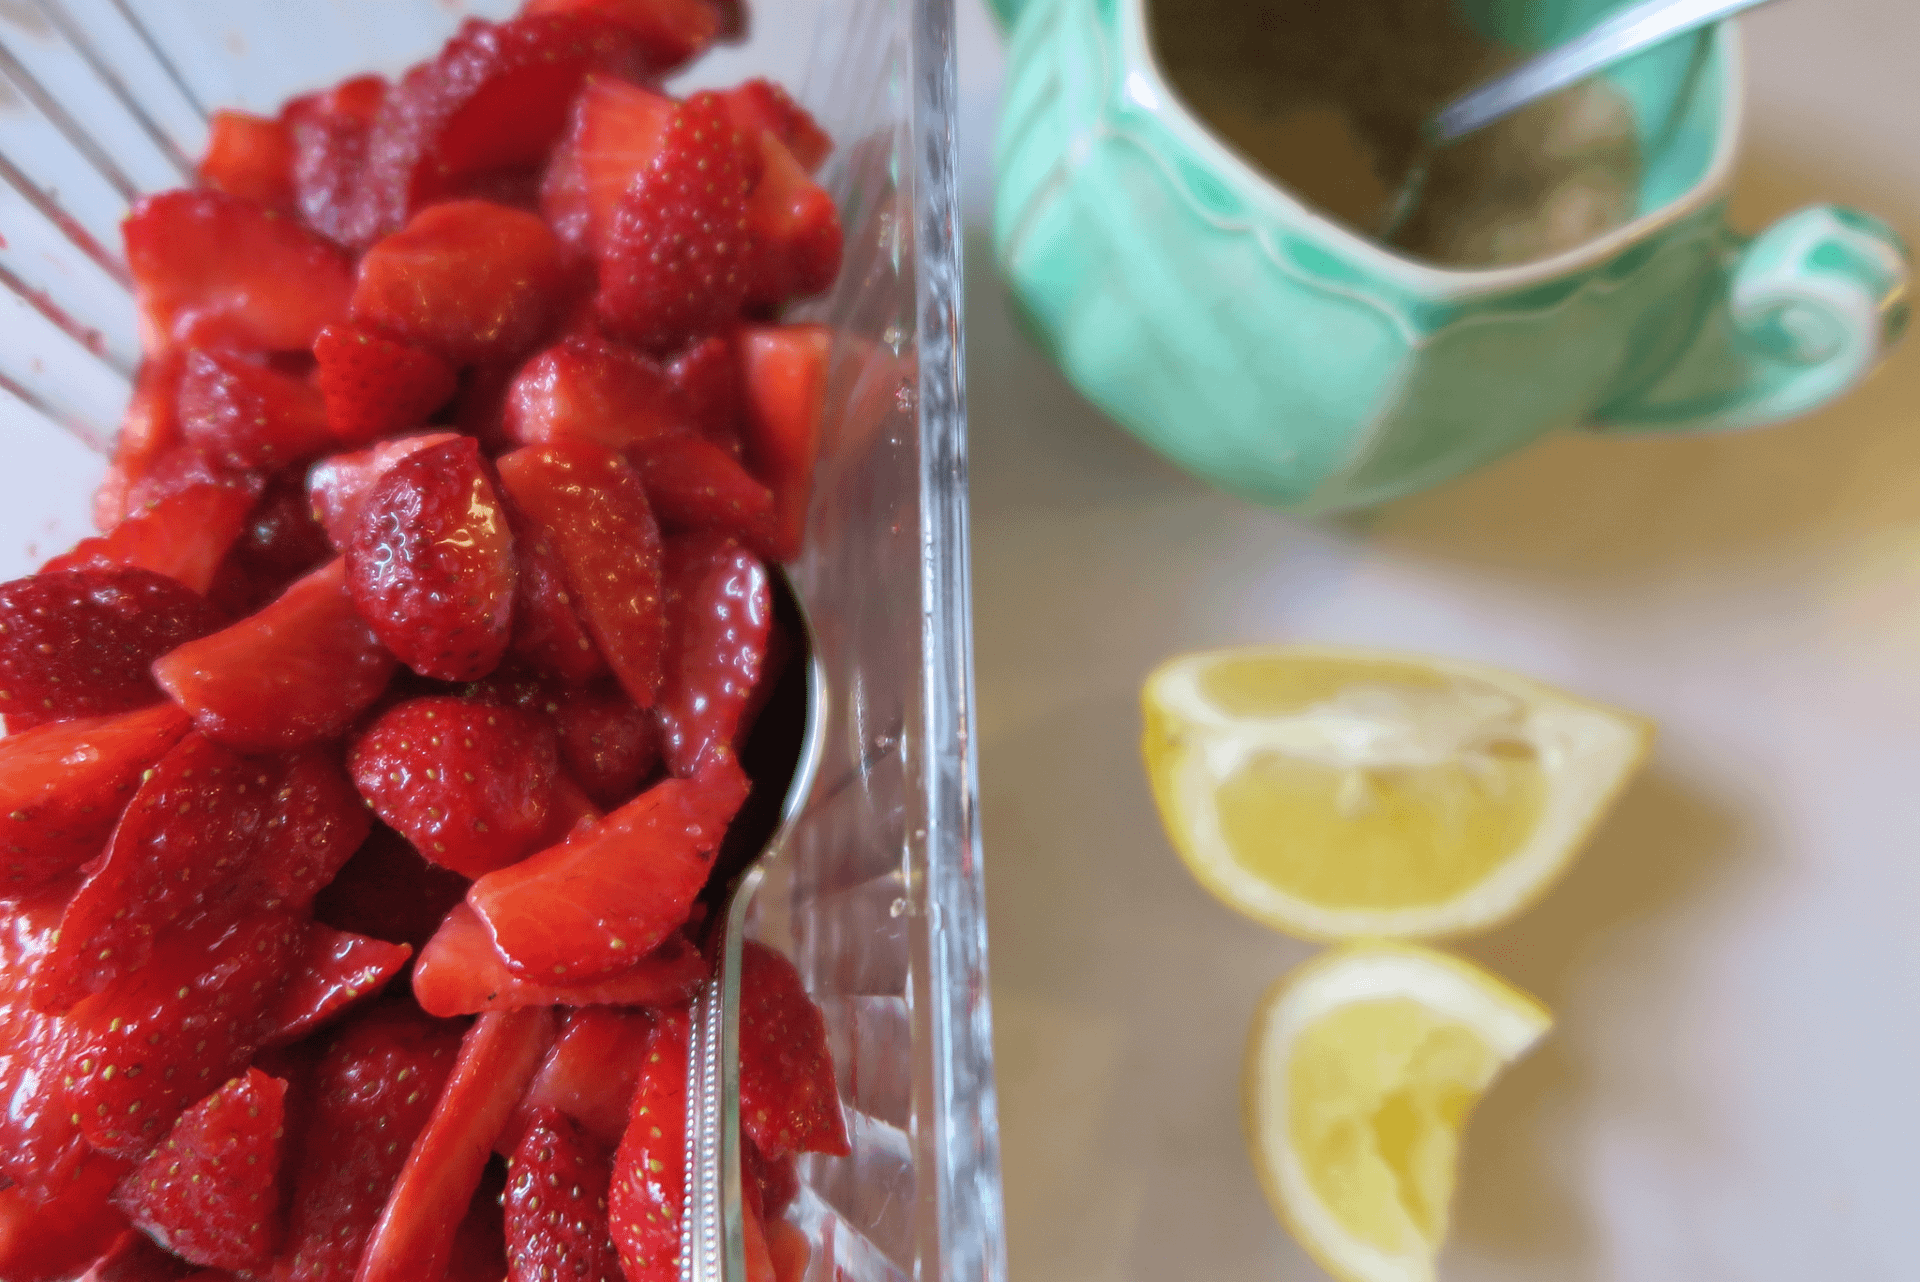 Slice strawberries in a plastic carton next lemon wedges and a light blue sugar bowl